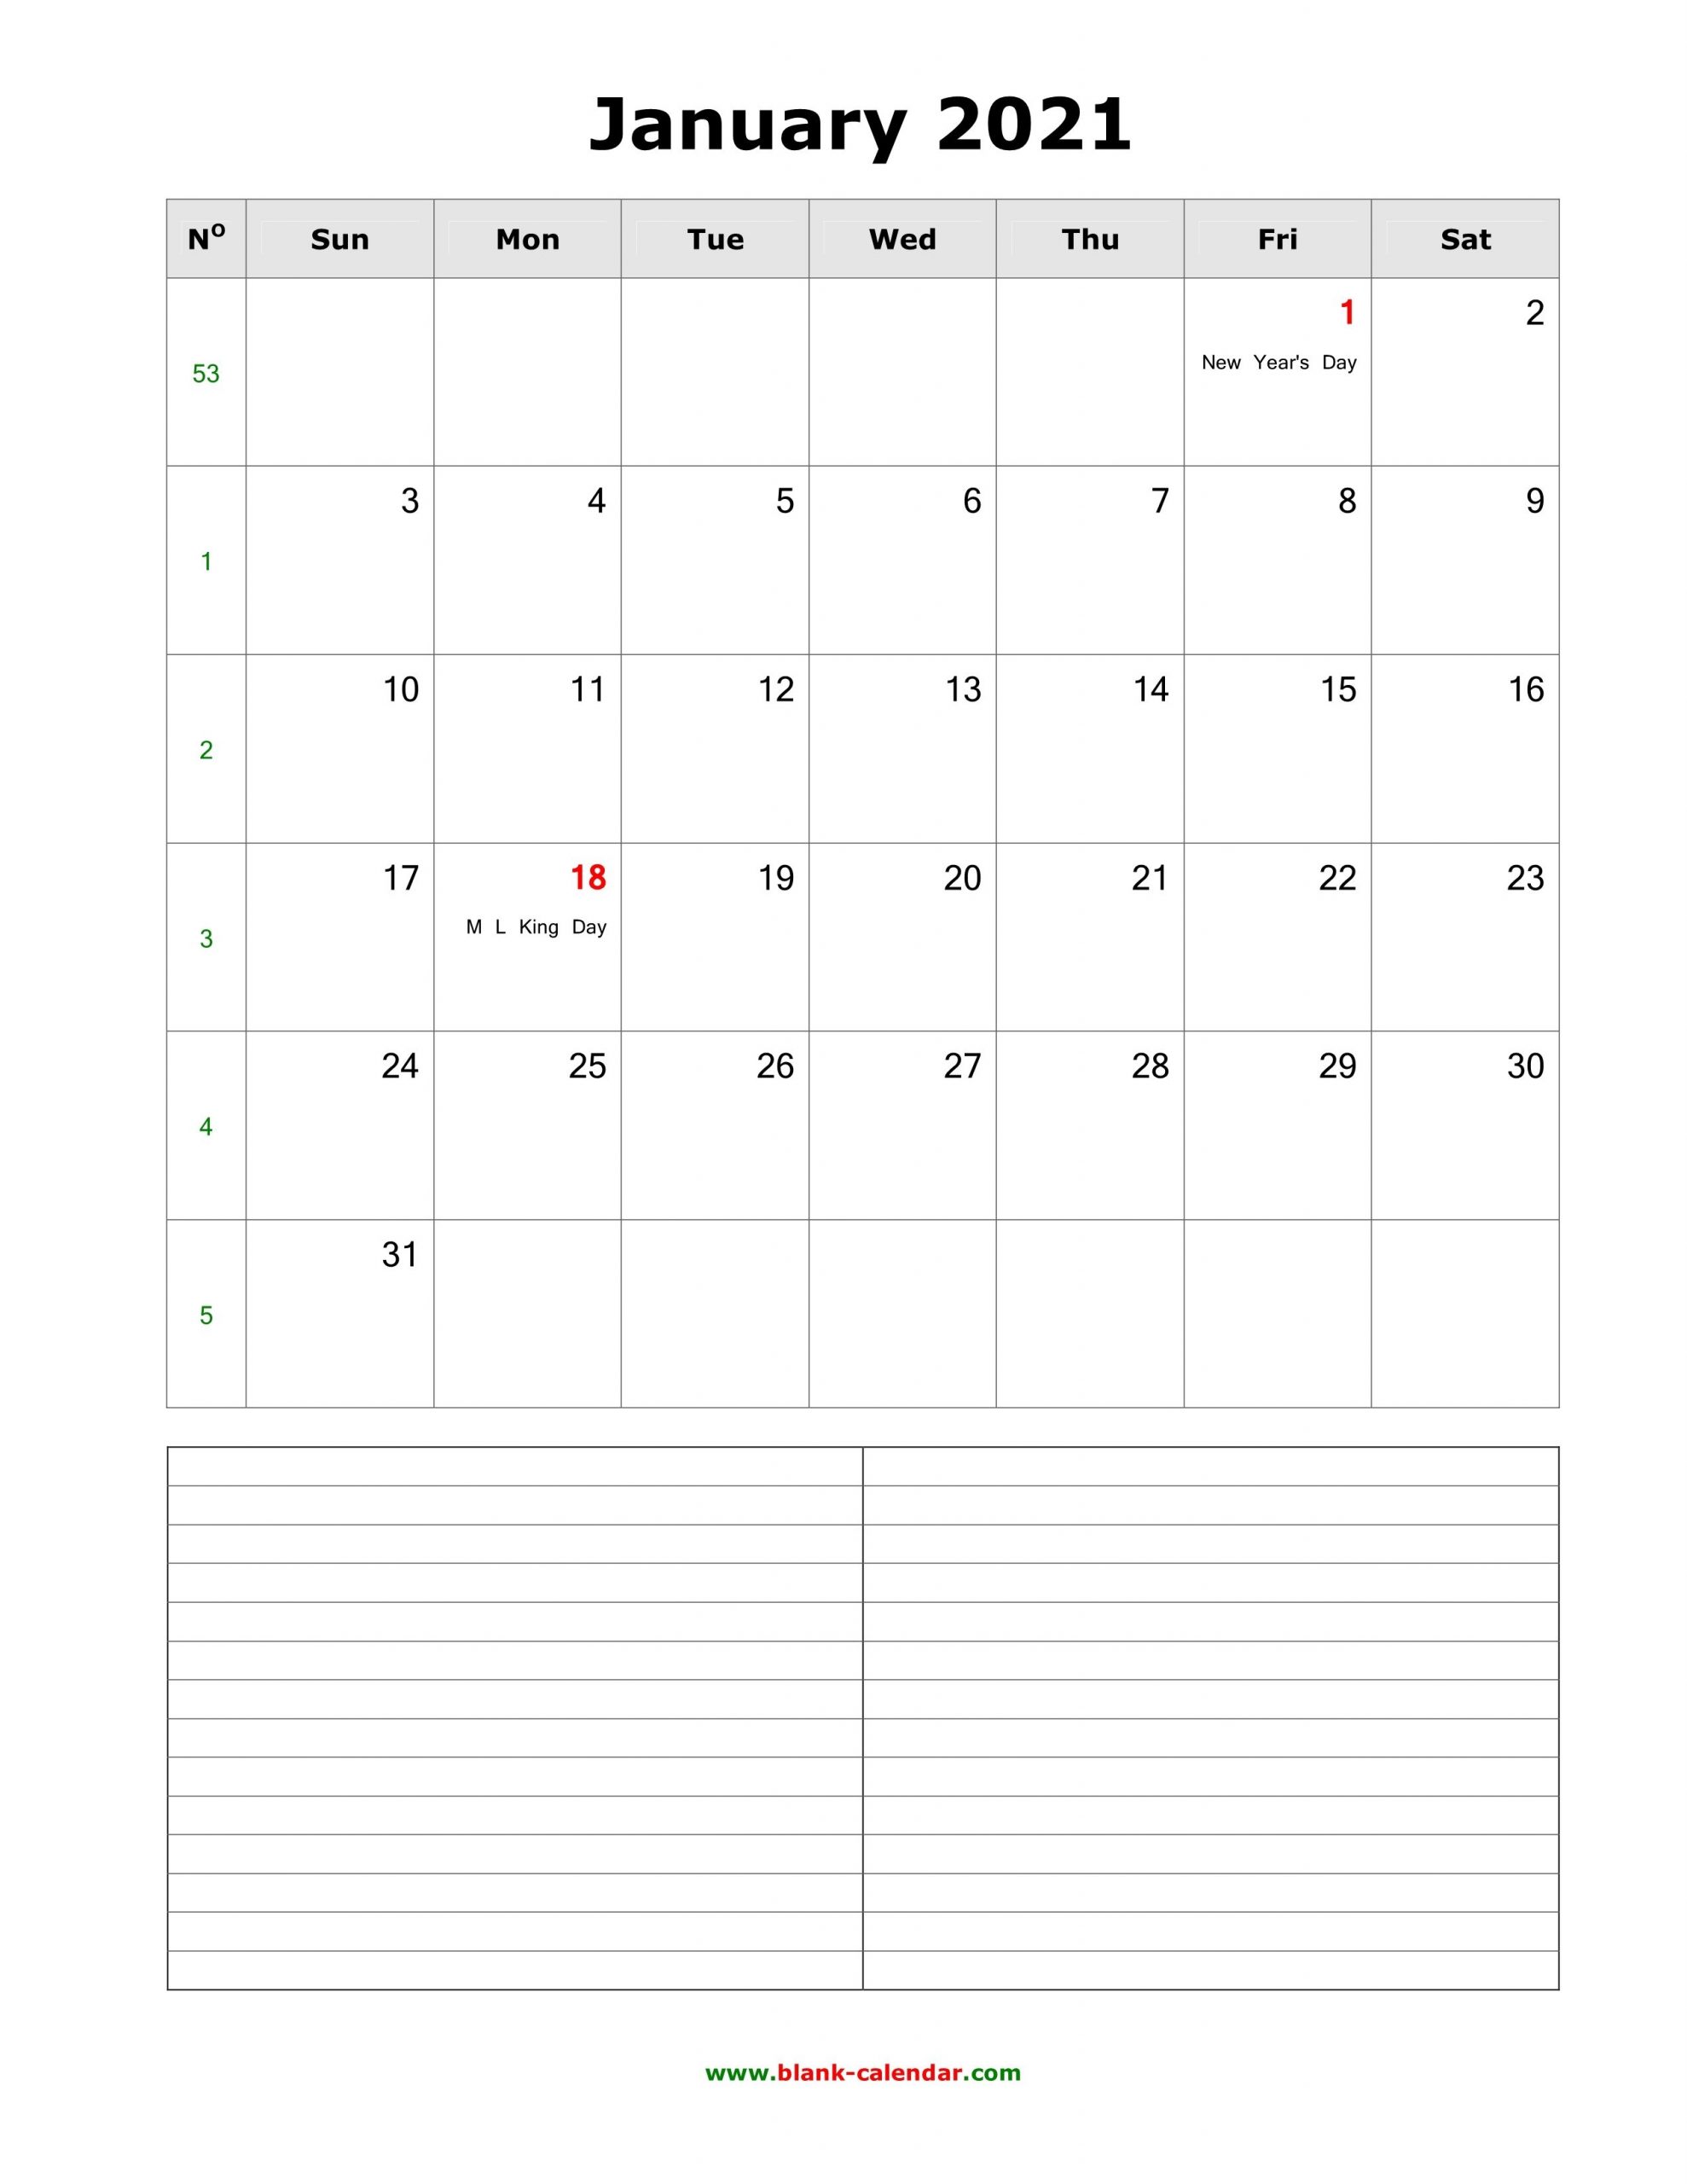 Download January 2021 Blank Calendar With Space For Notes